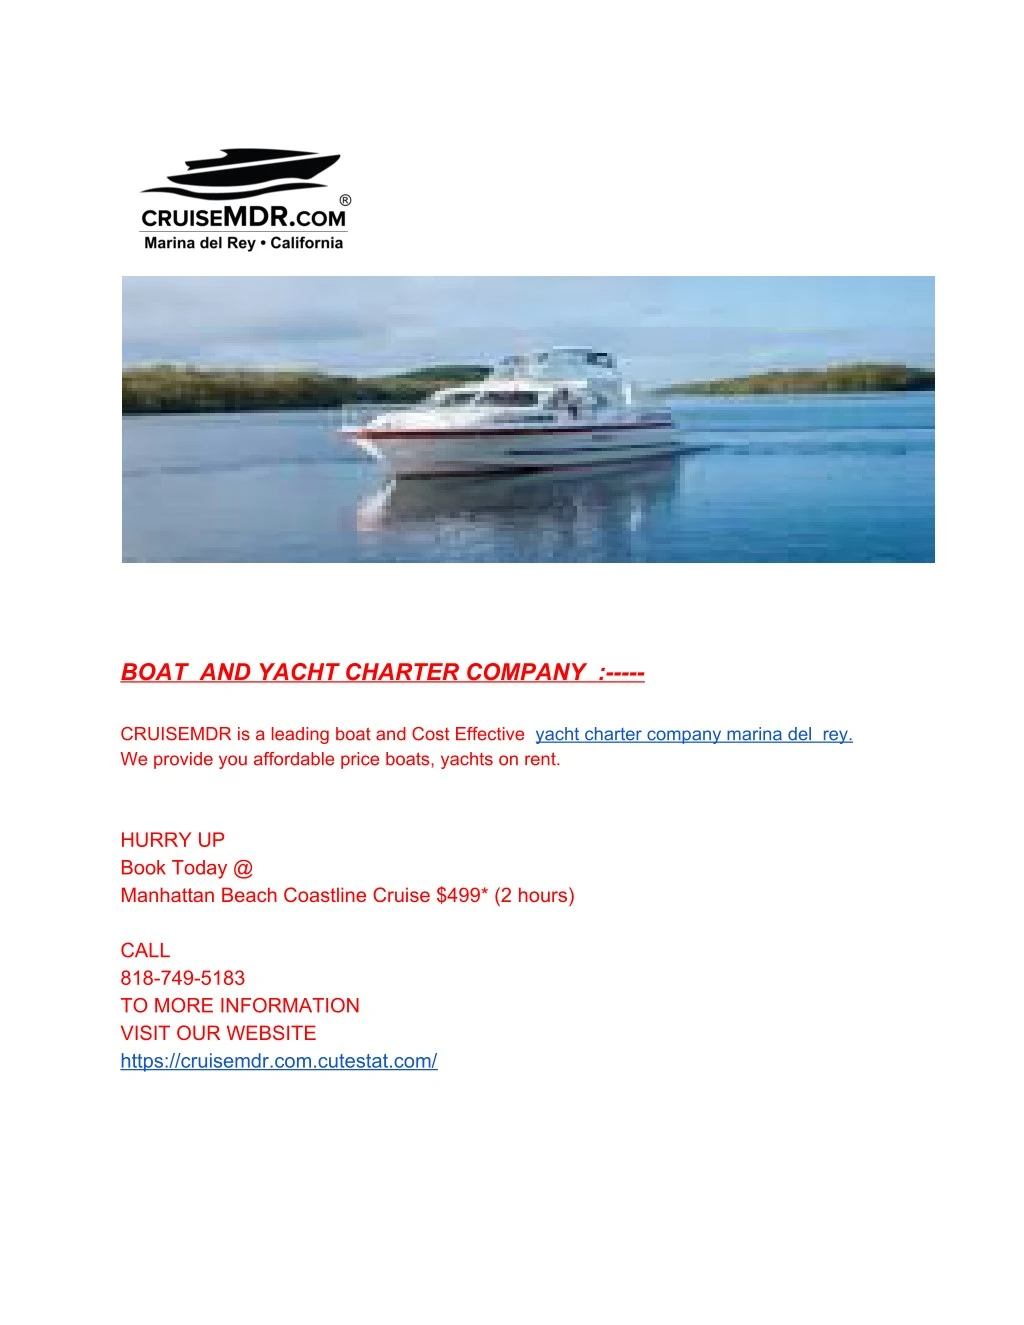 boat and yacht charter company cruisemdr n.